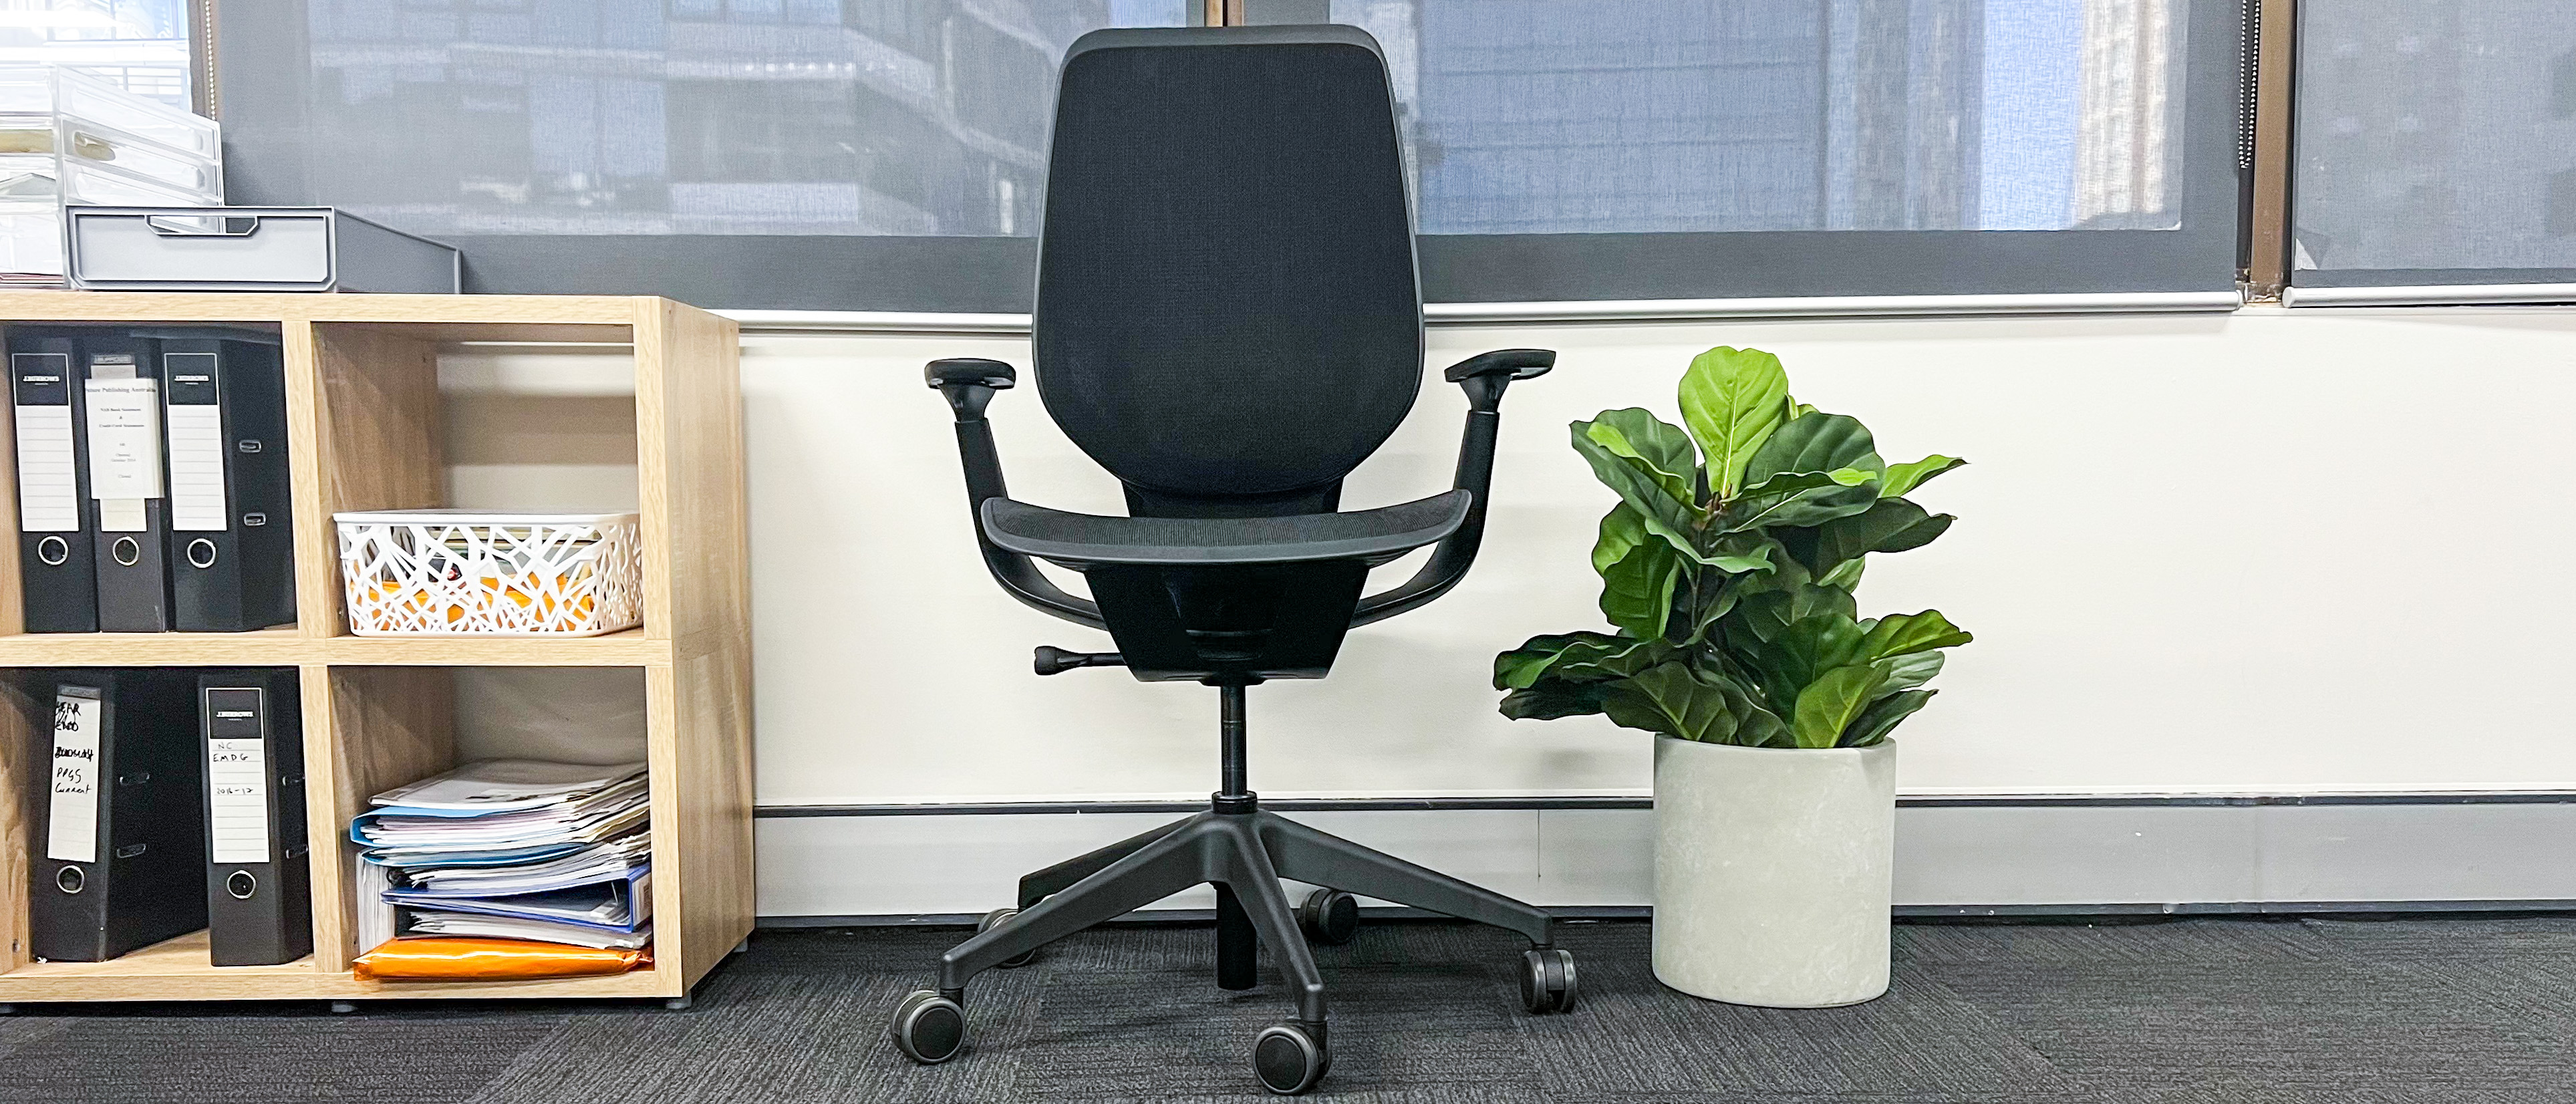 Steelcase Karman office chair review